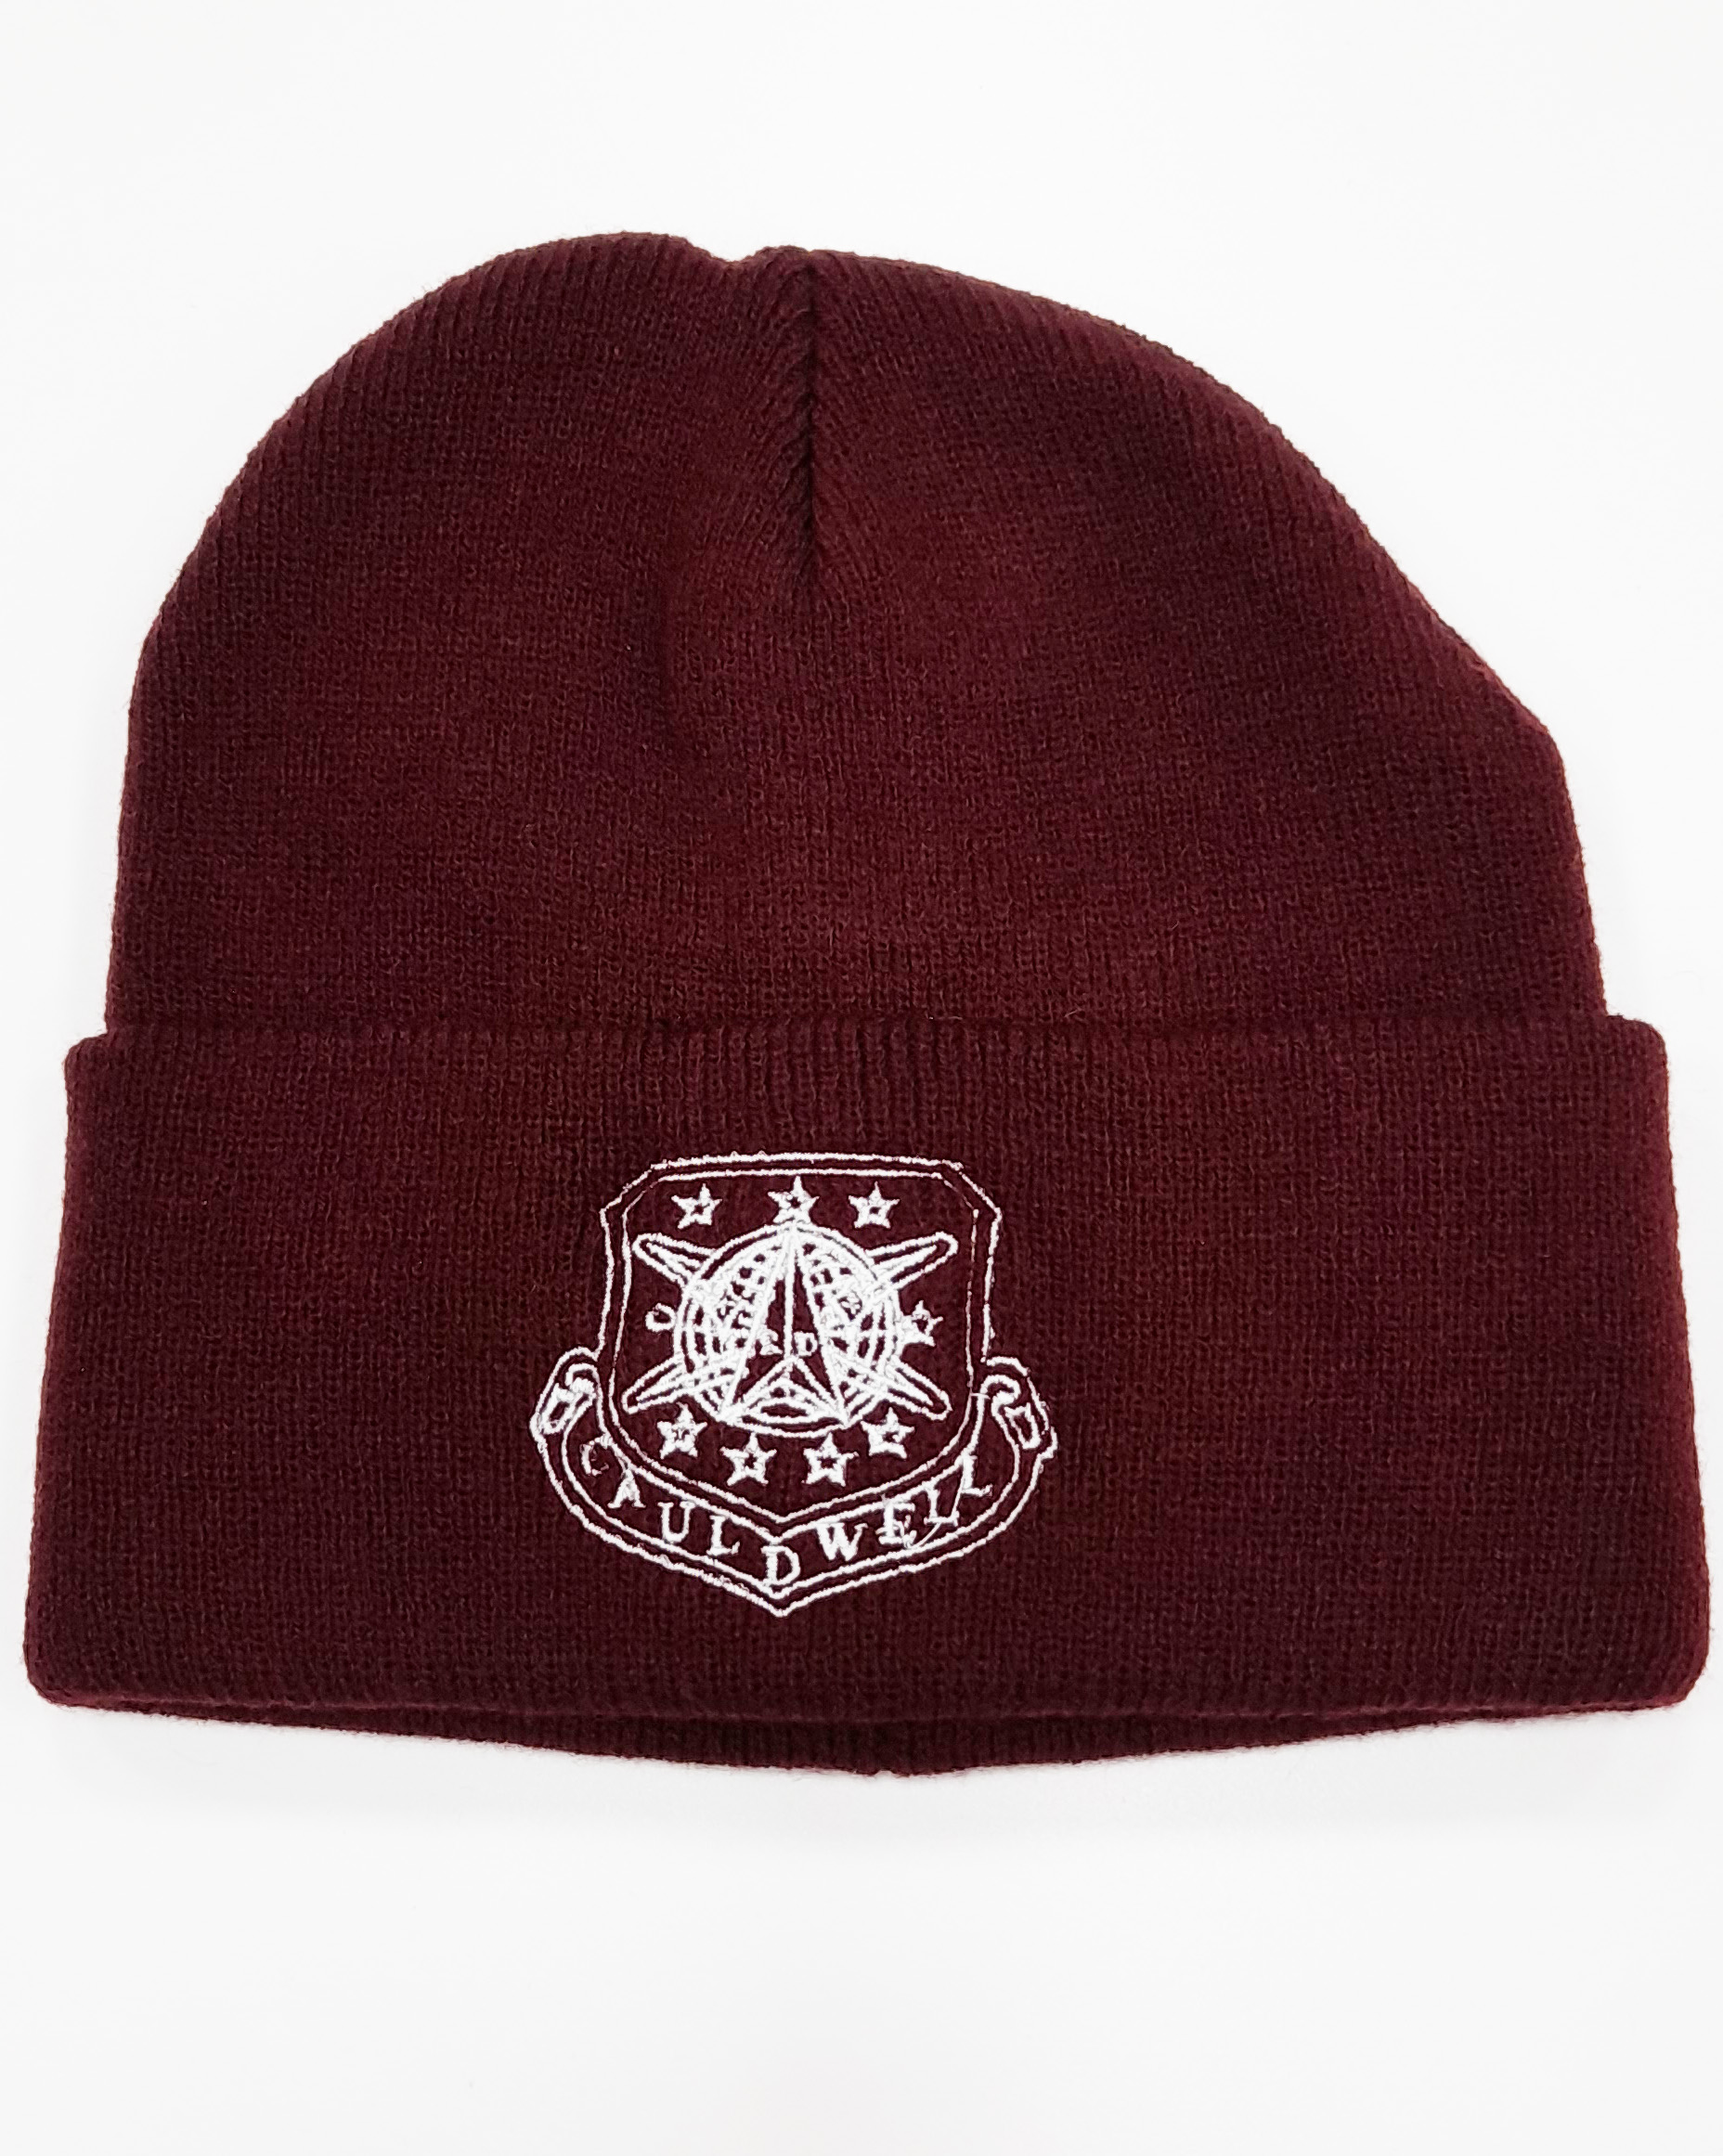 CAULDWELL SCHOOL KNITTED HAT (MAROON WITH LOGO)